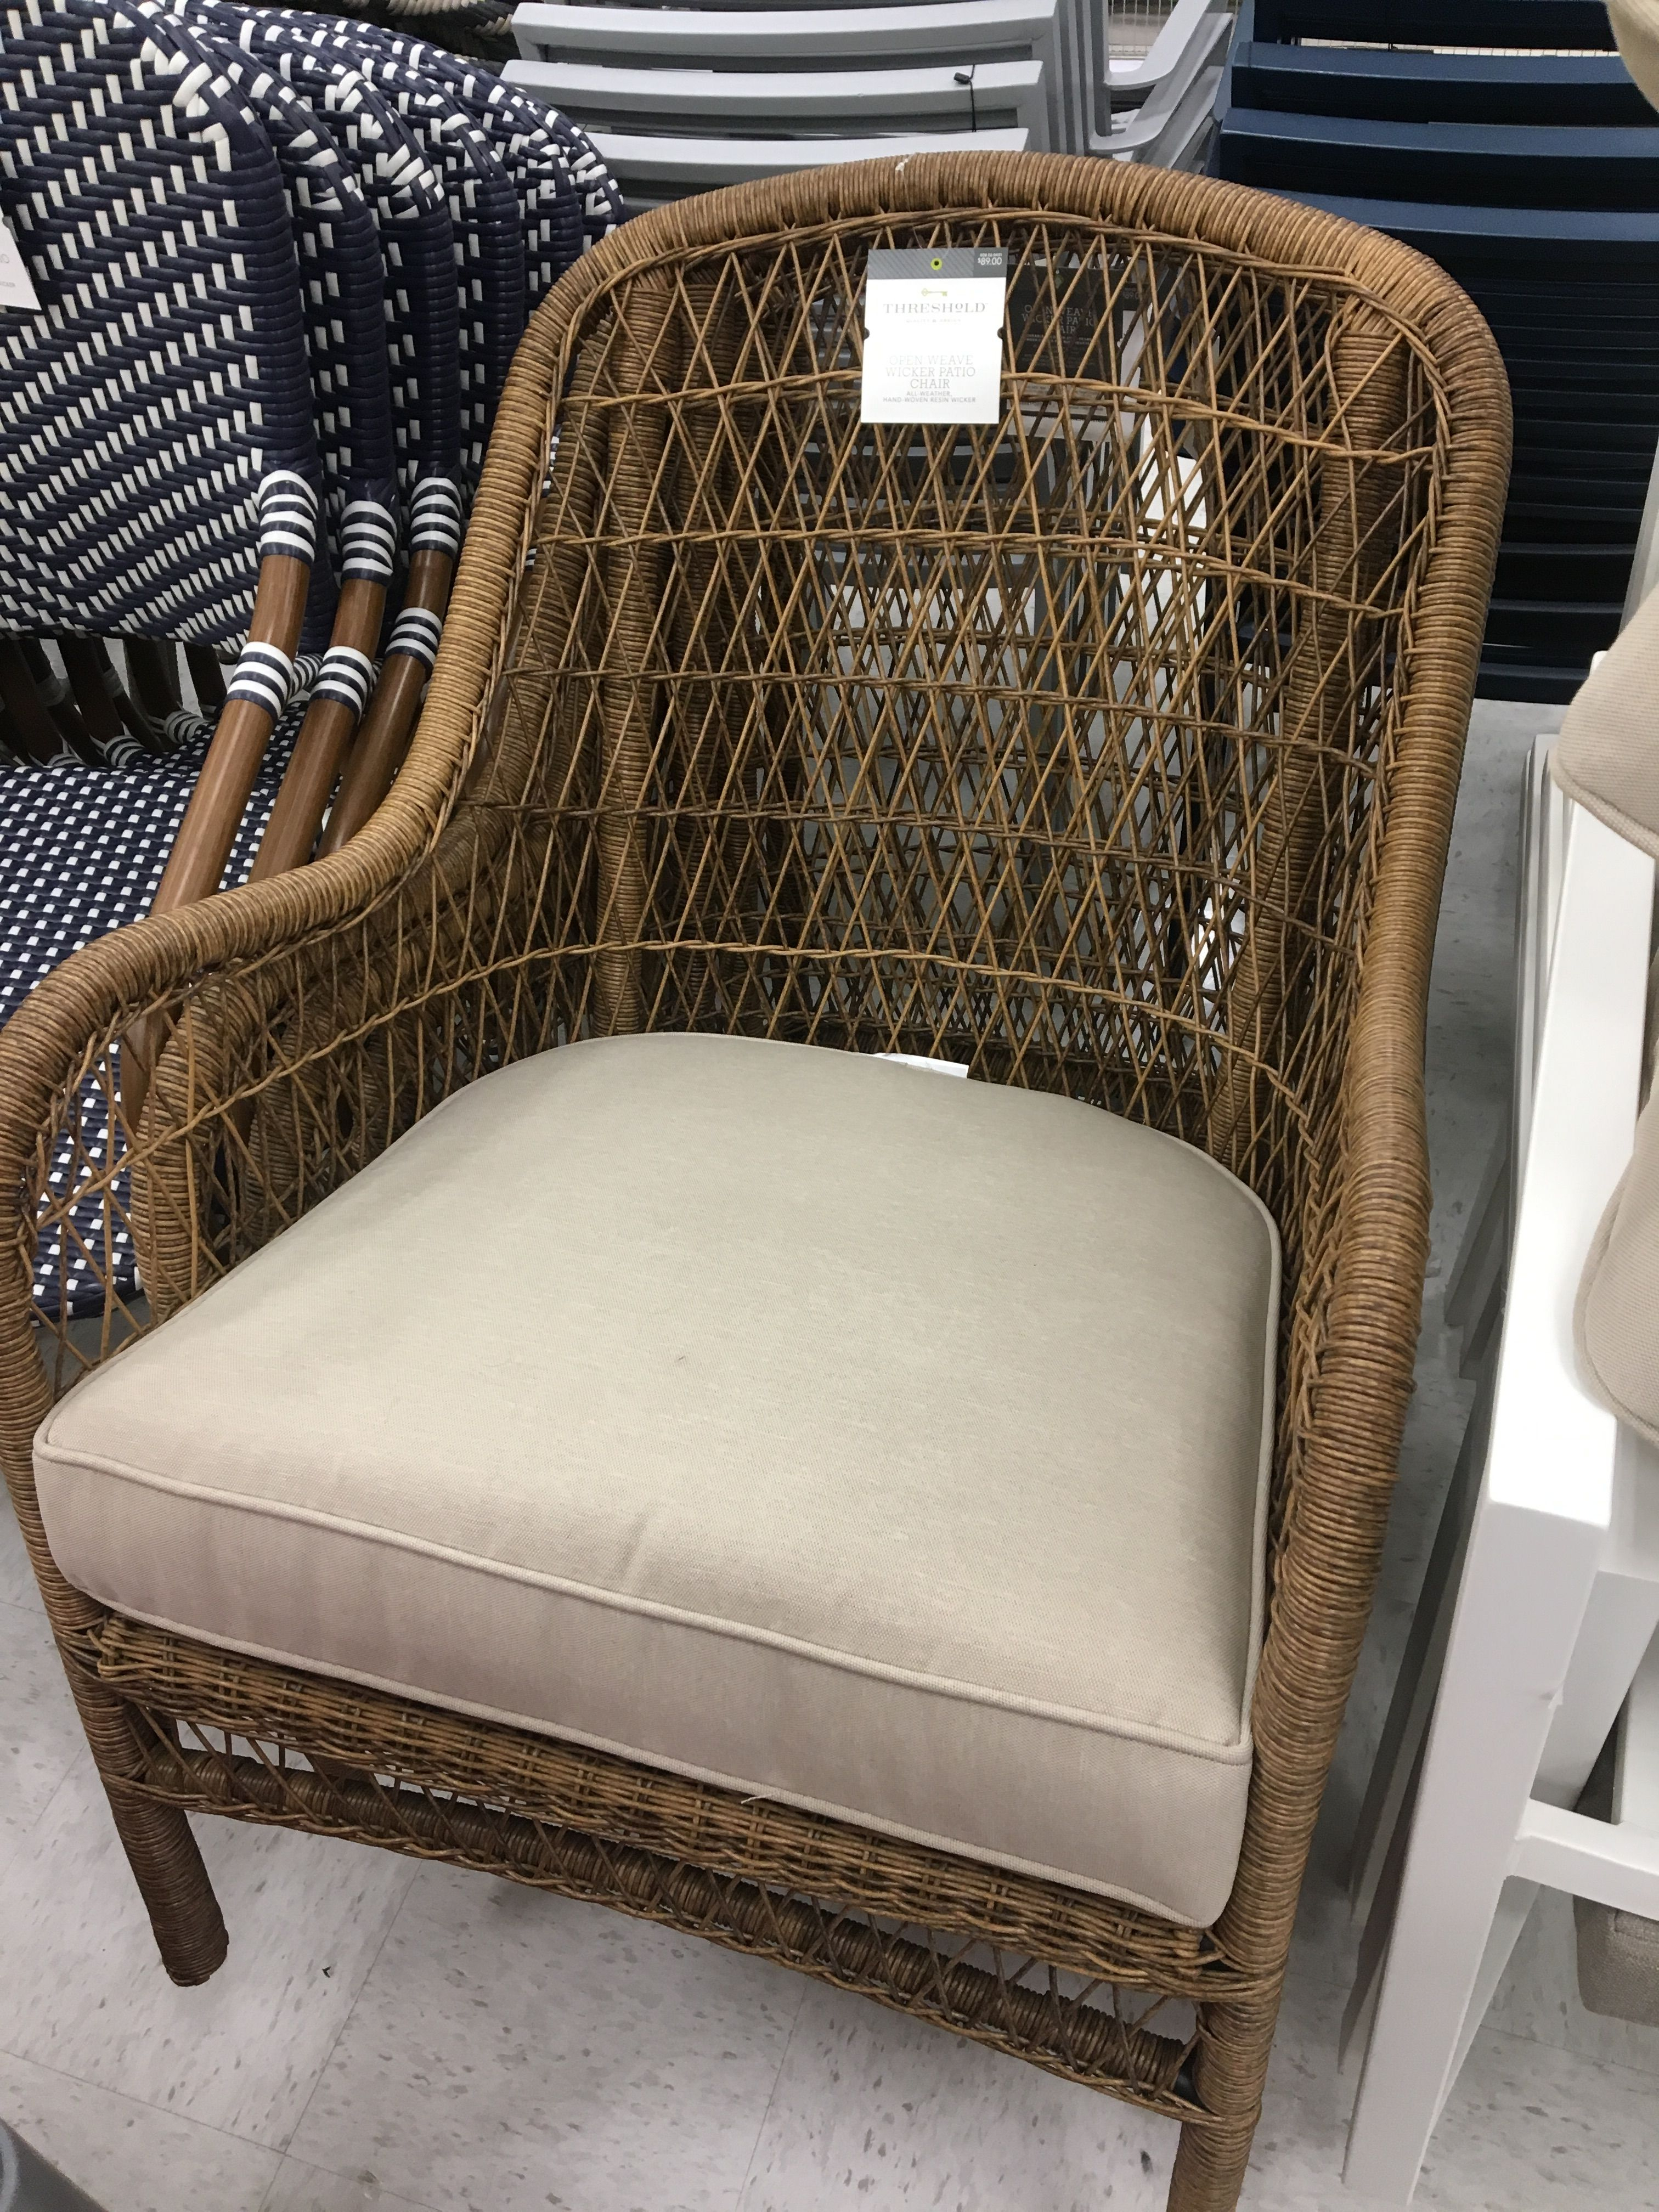 New Target Patio Furniture Love The Wicker Chairs Target in dimensions 3024 X 4032